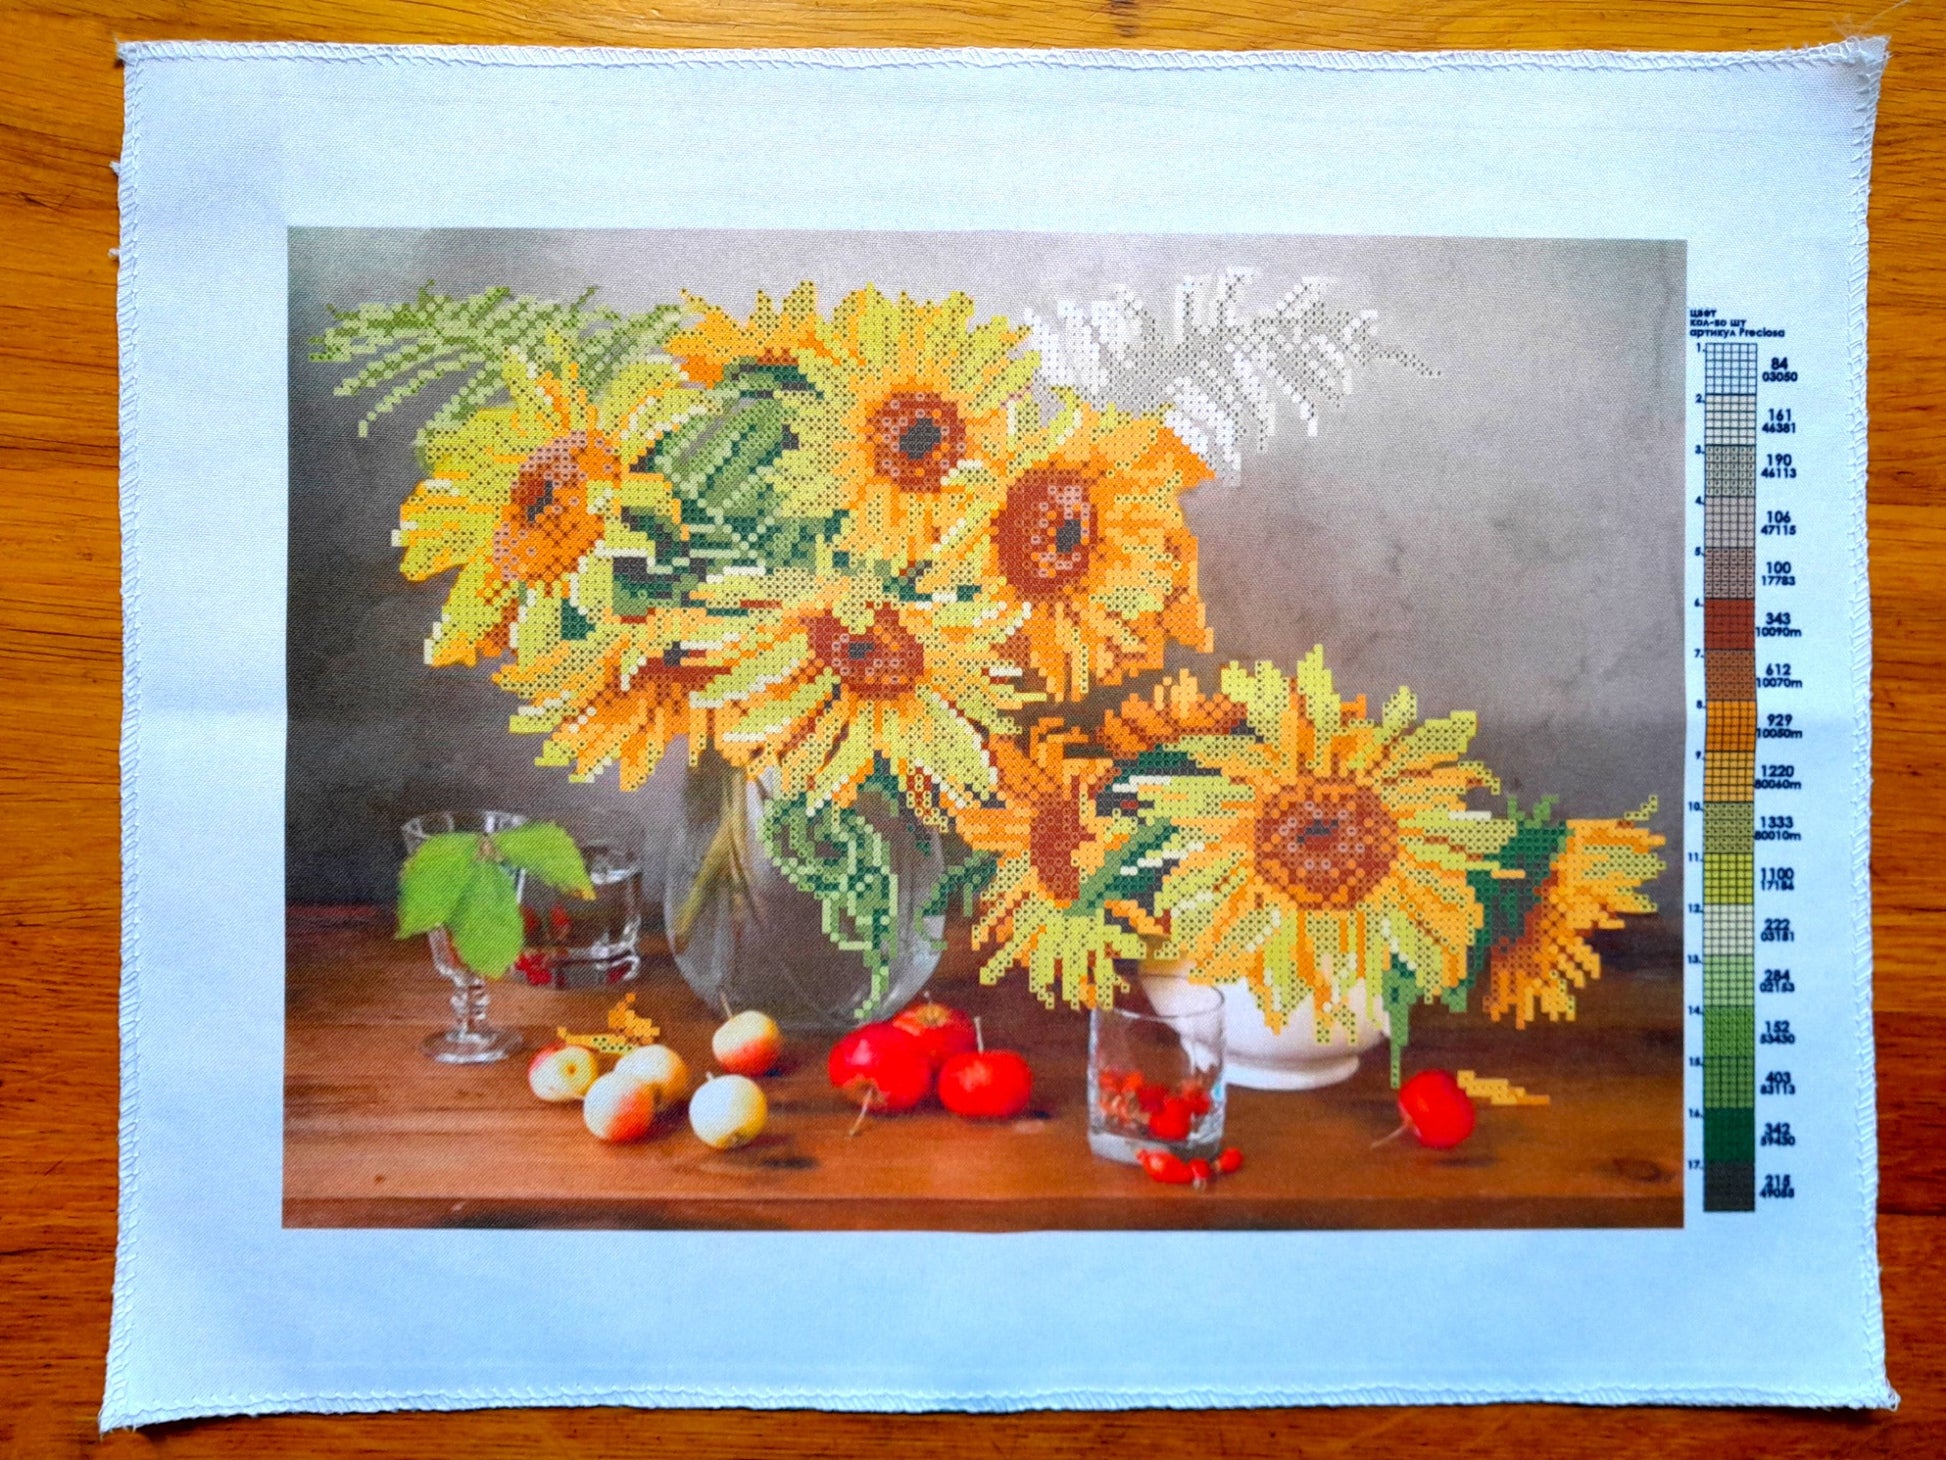 Bead embroidery kit ''Sunflowers'' size: 13.8-9.8in (35-25cm) - VadymShop